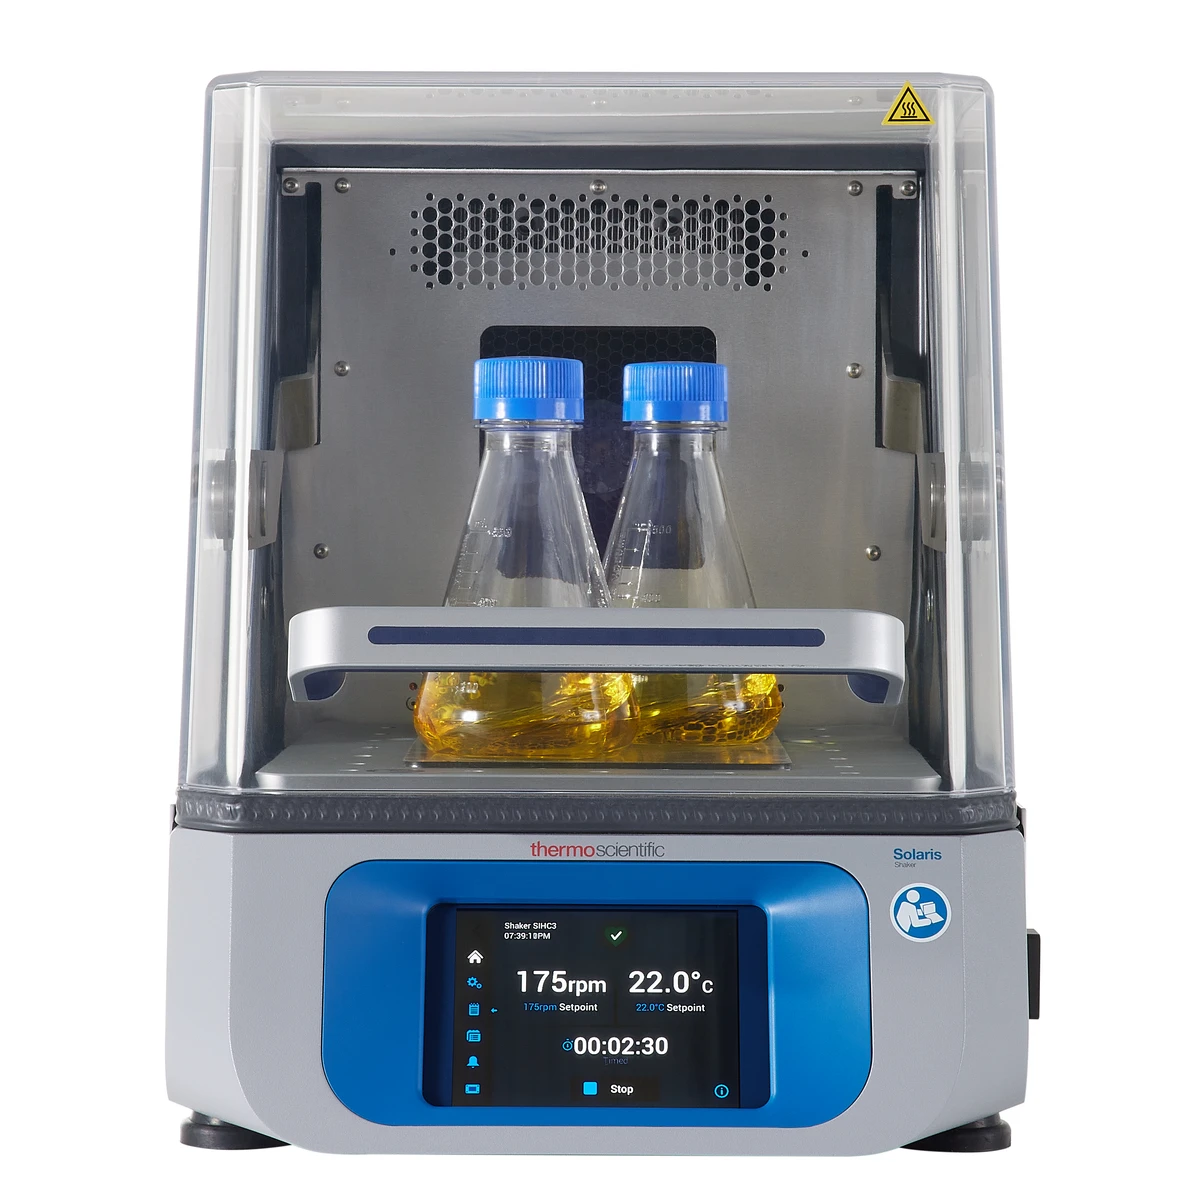 Thermo Scientific™ Solaris 2000 R Small Incubated and Refrigerated Benchtop Orbital Shaker